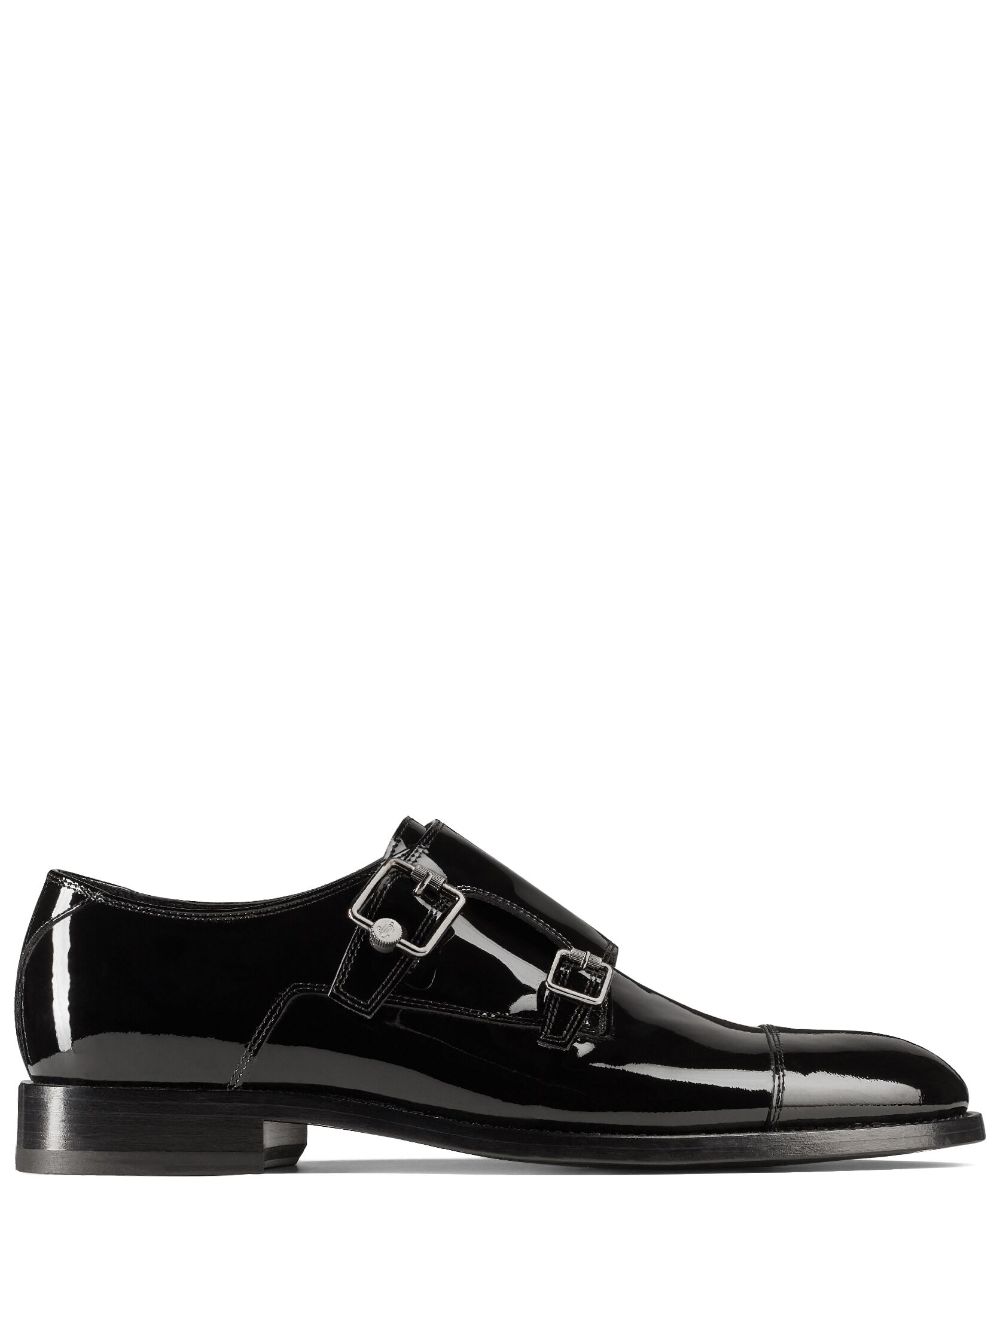 Image 1 of Jimmy Choo Finnion leather monk shoes